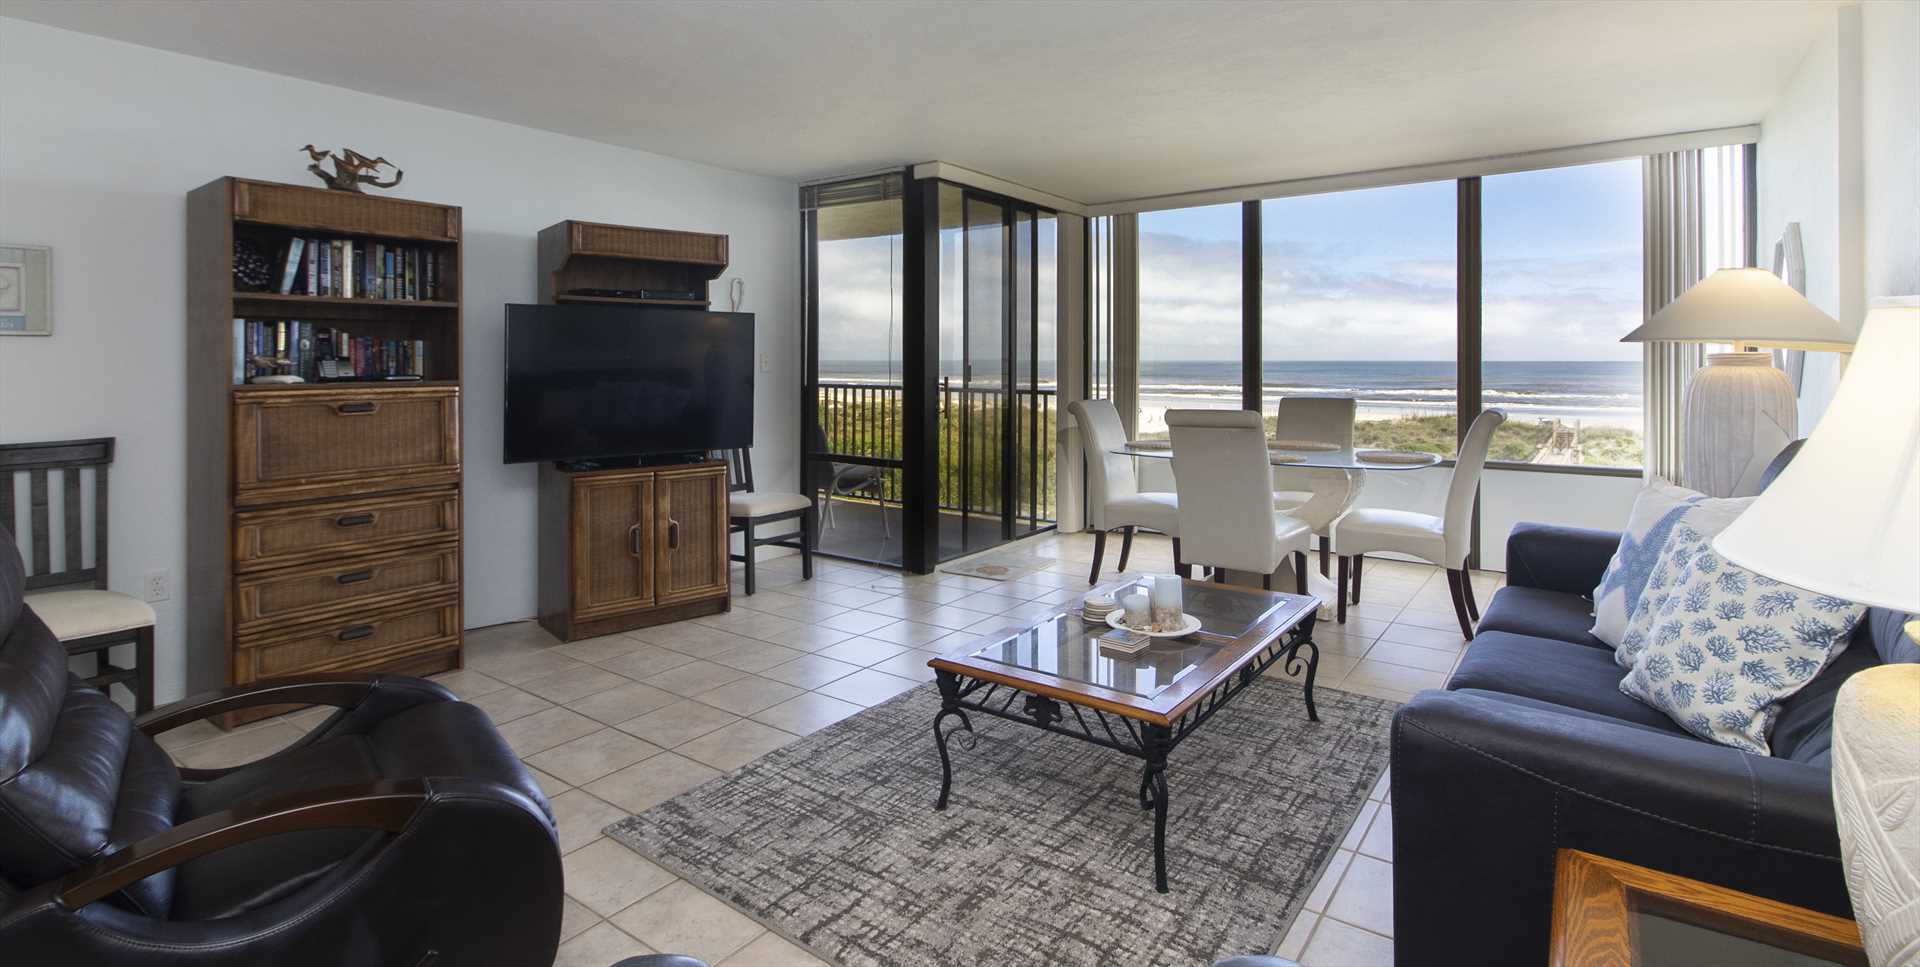 Captains' Quarters  We have your Perfect Beach Vacation Rental in St.  Augustine, Florida